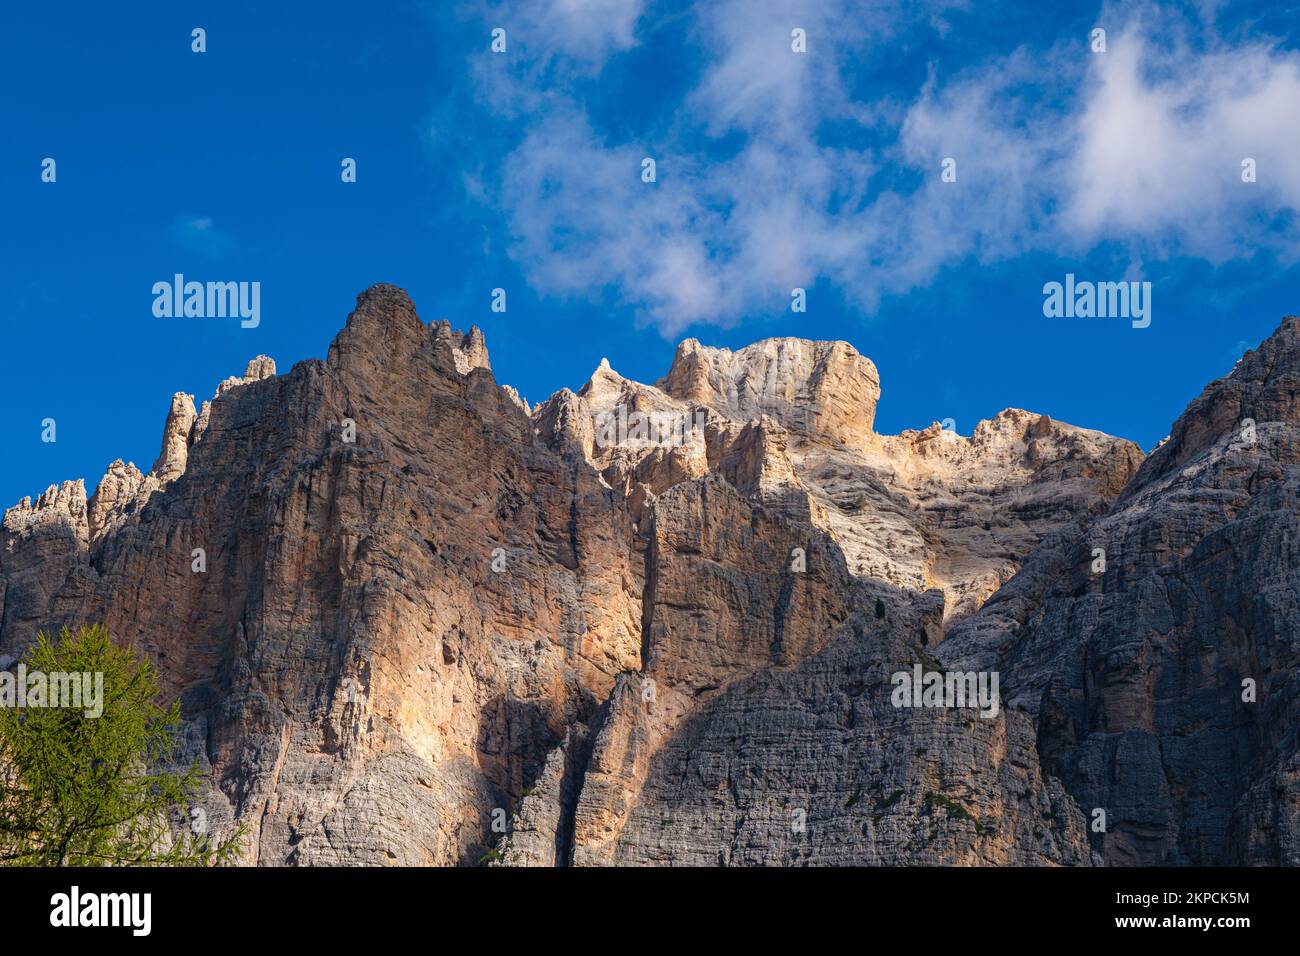 Great mountain range in the Dolomites mountains with great light conditions Stock Photo